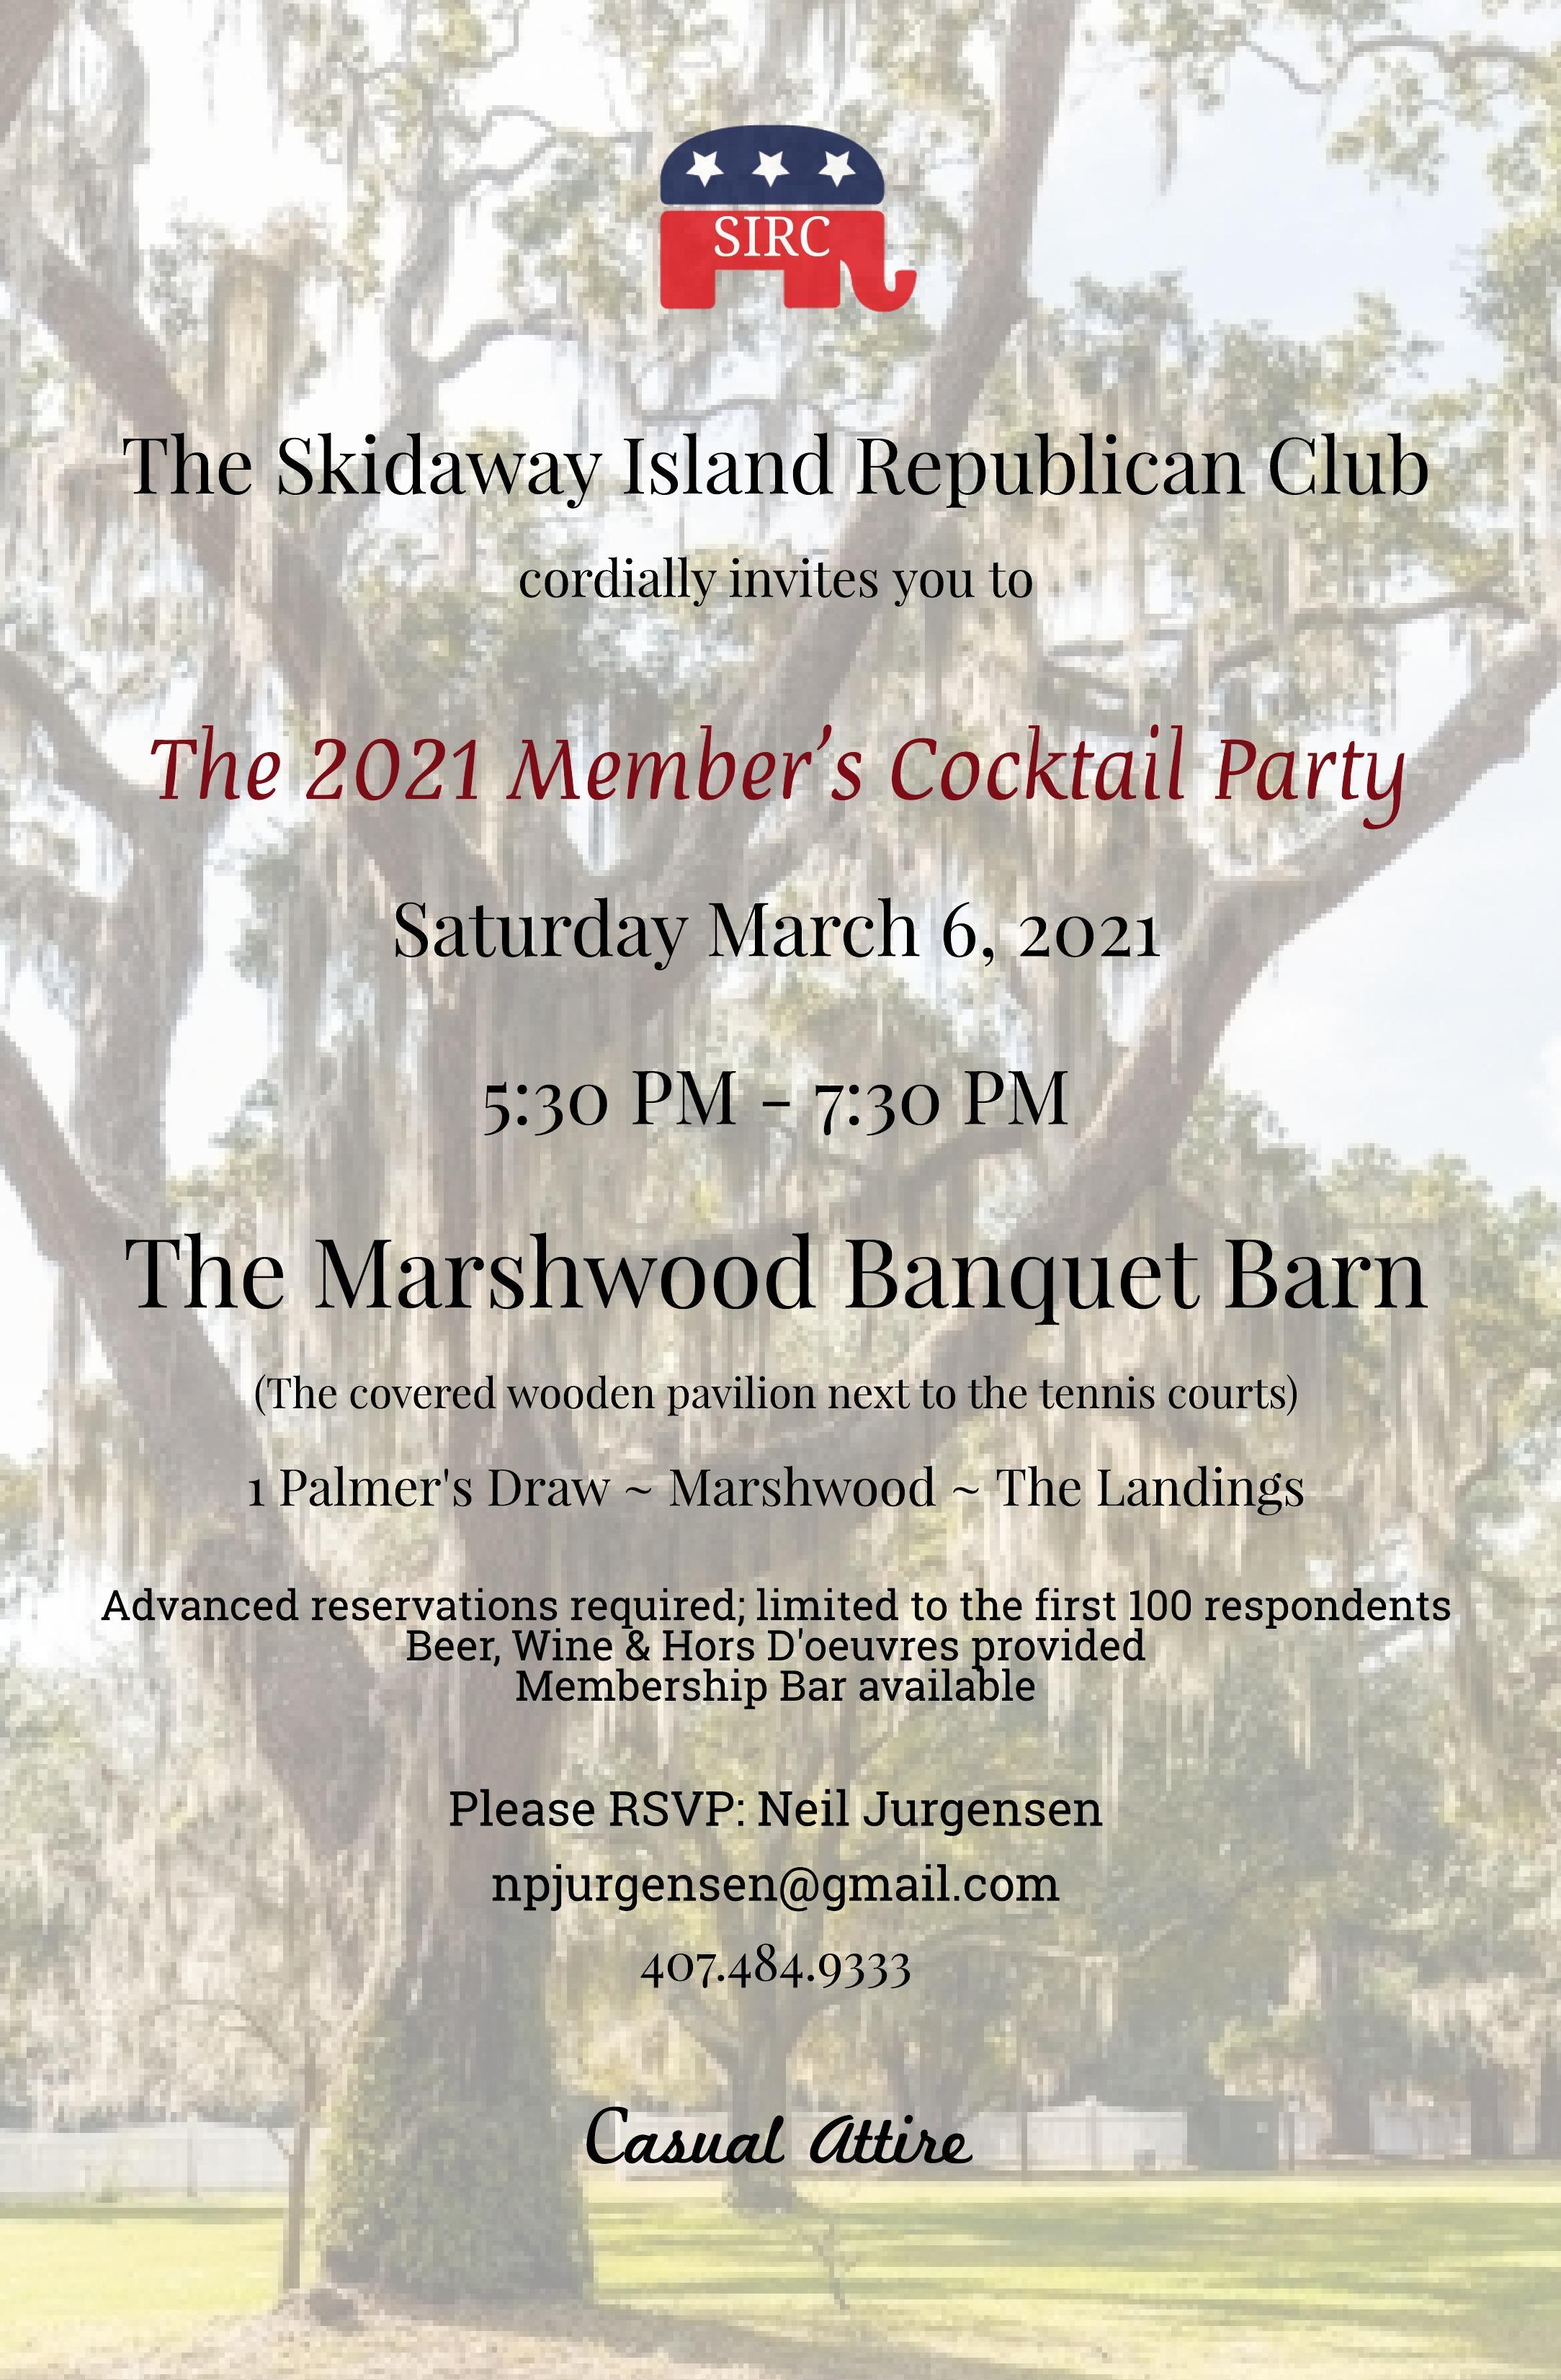 SIRC 2021 Member's Cocktail Party Invitation Announcement